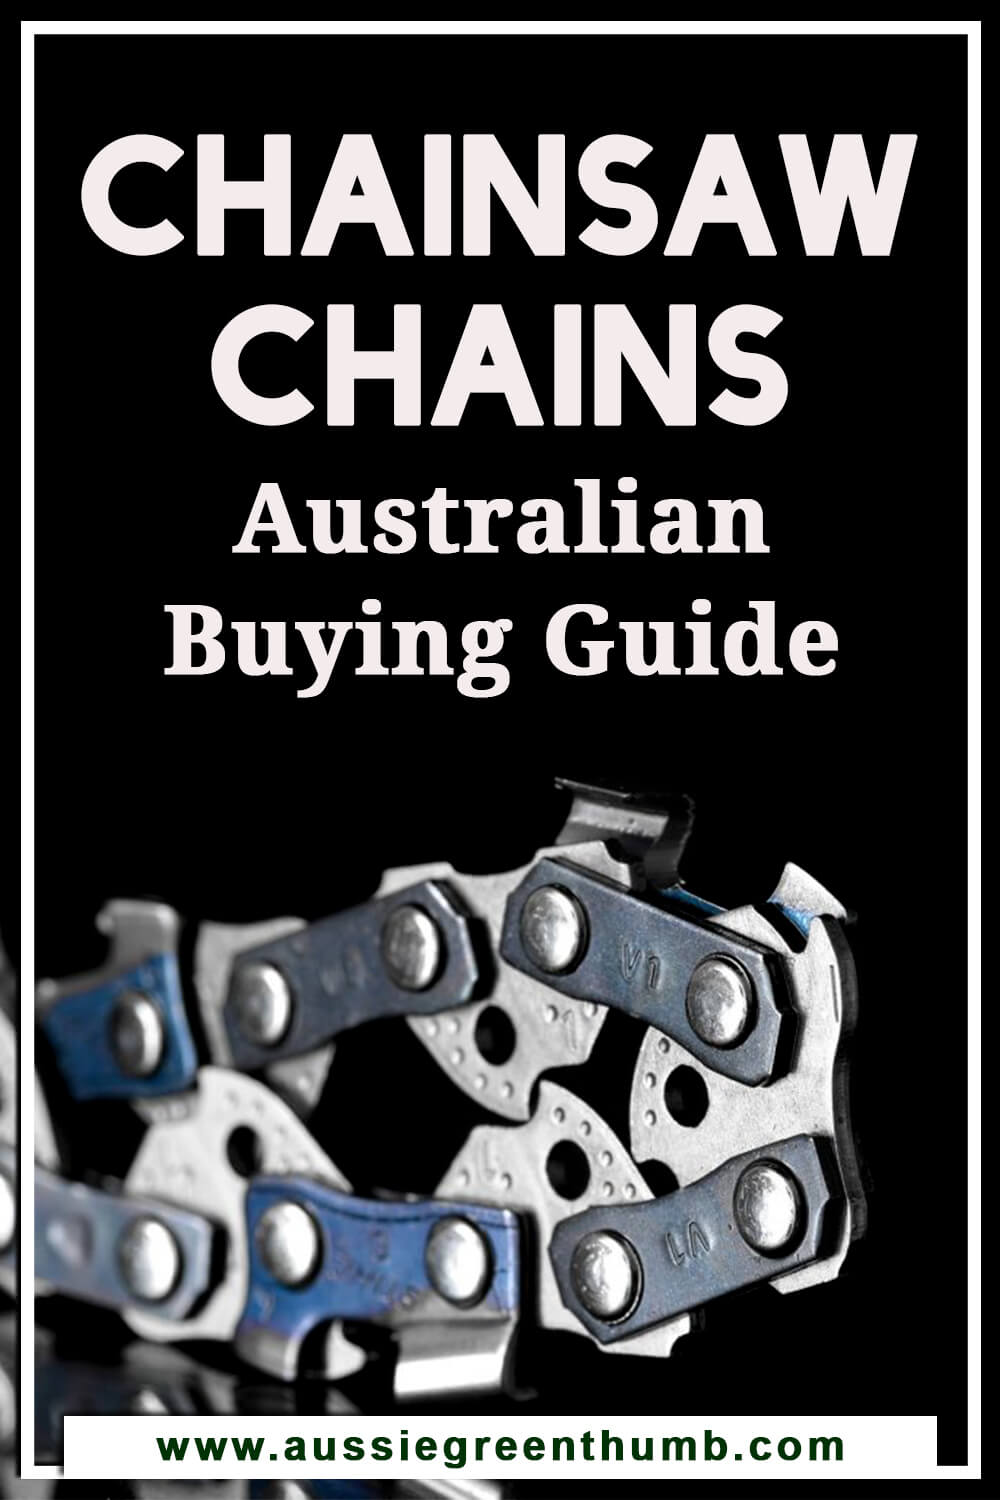 Best Chainsaw Chains Australian Buying Guide